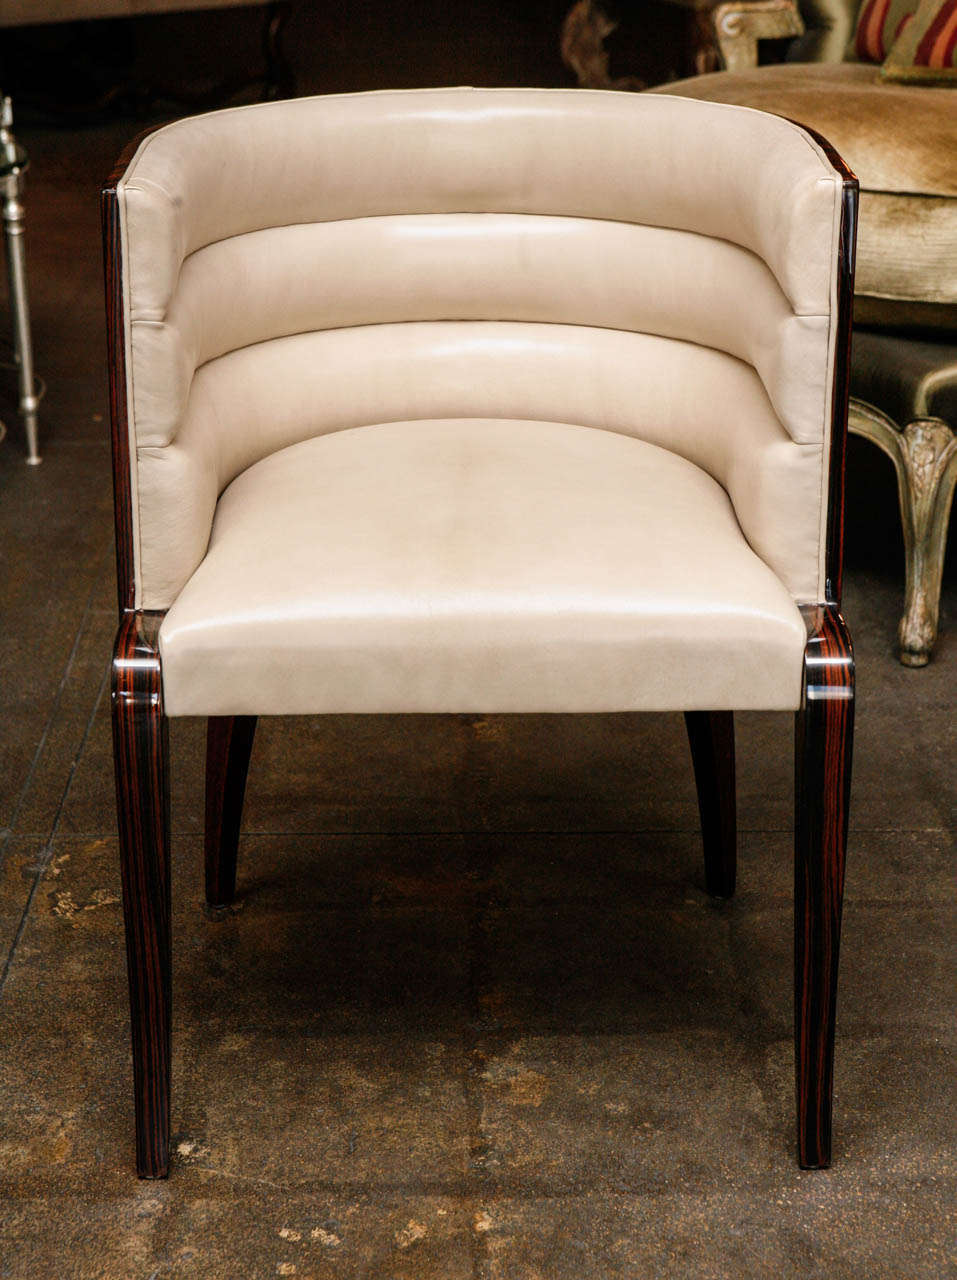 Macassar vanity chair, perfect size for an elegant vanity area. Tufted channel back is exquisite with white leather.